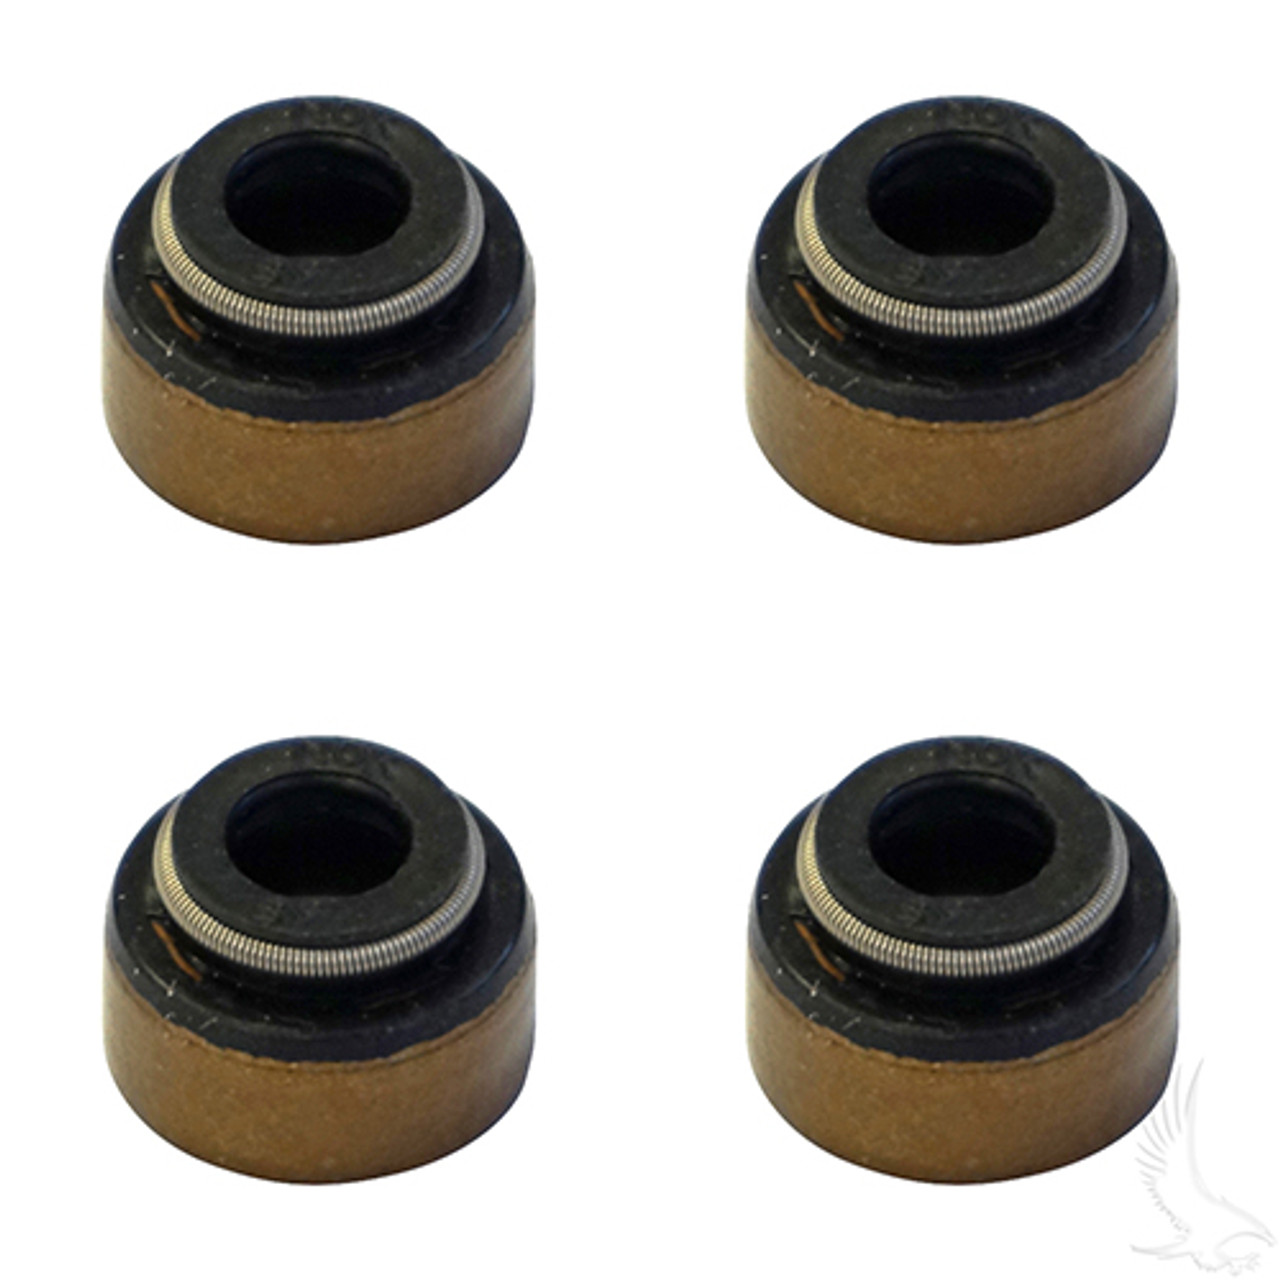 Valve Stem Seal (Pack of 4) for Club Car DS/Precedent Gas 1992-2003 FE290/350, ENG-223, 1016566 , 5746